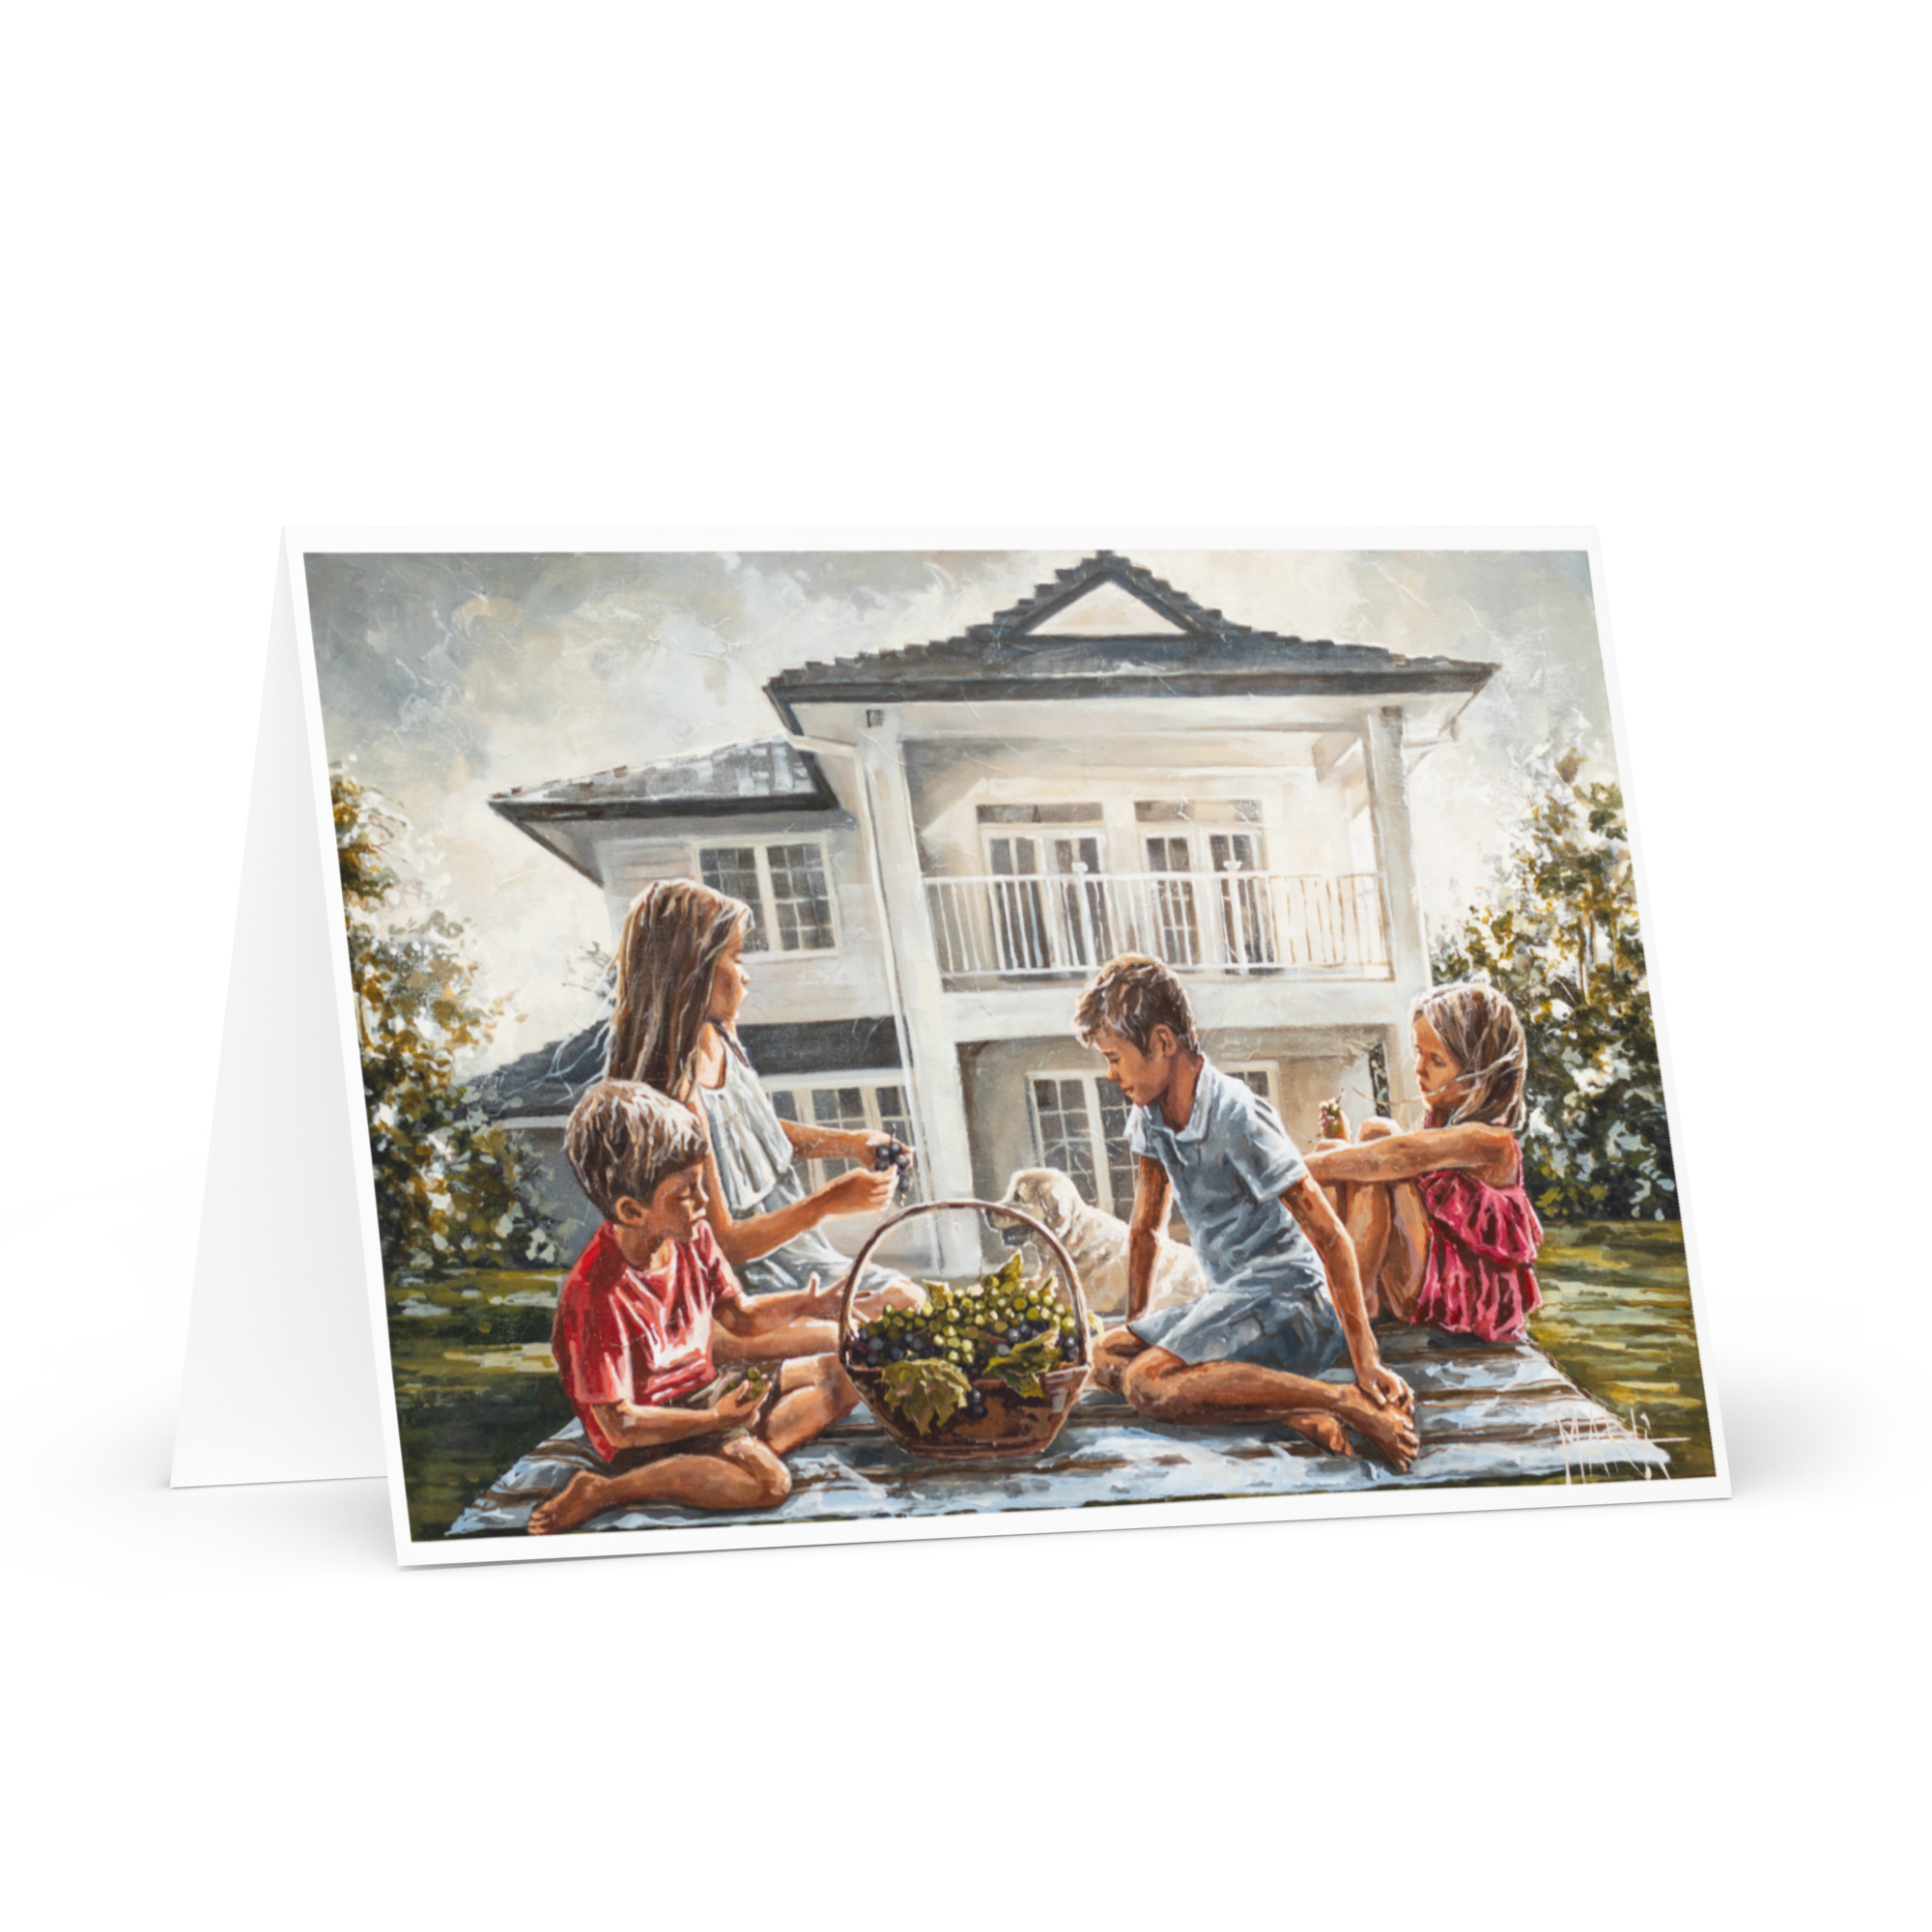 Our home, my heart | Greeting Card